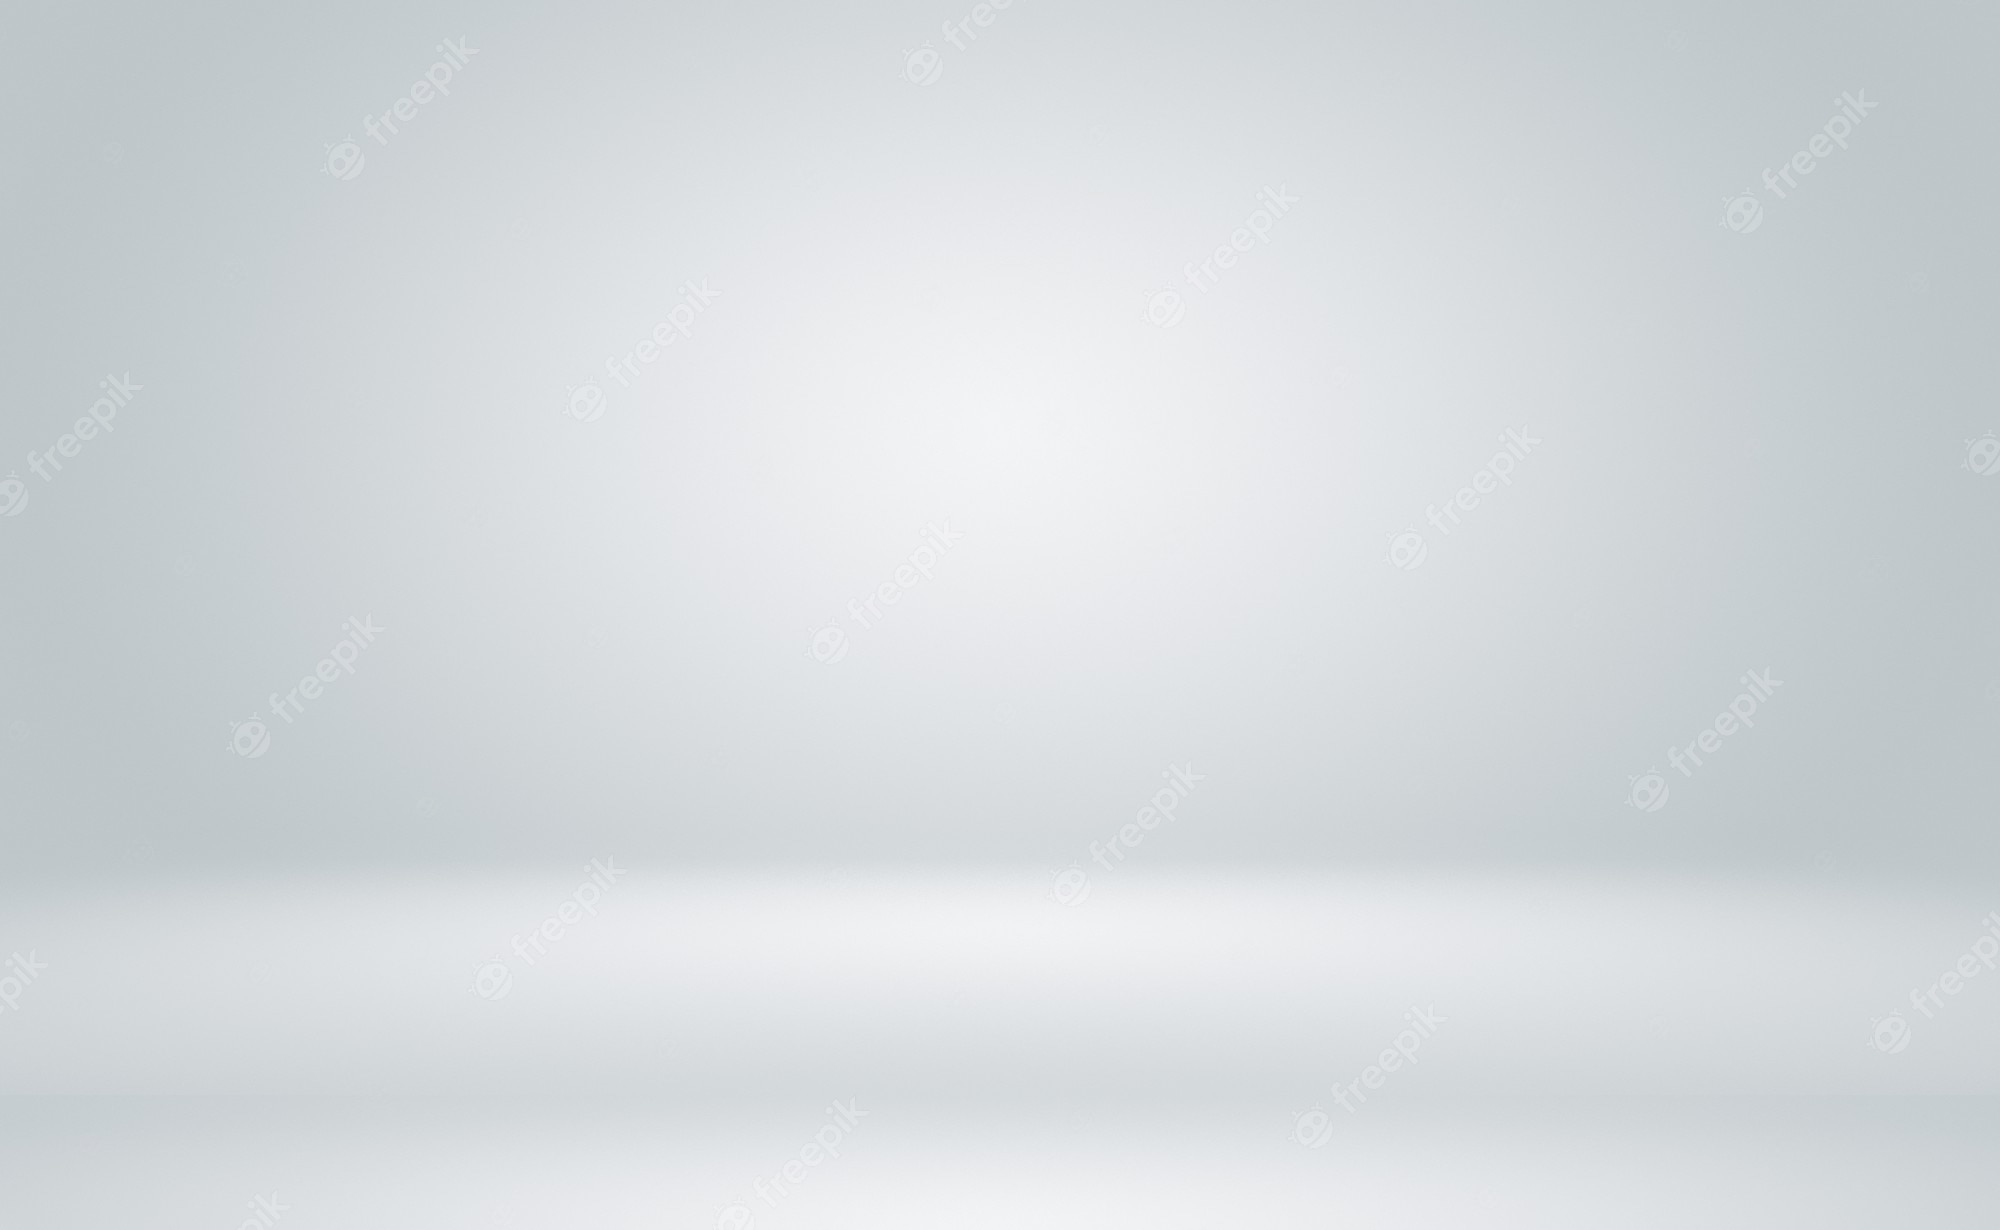 Abstract Luxury Blur Dark Grey Black Gradient Used As Background Studio Wall Display Your Products Plain Studio Background 1258 54444 